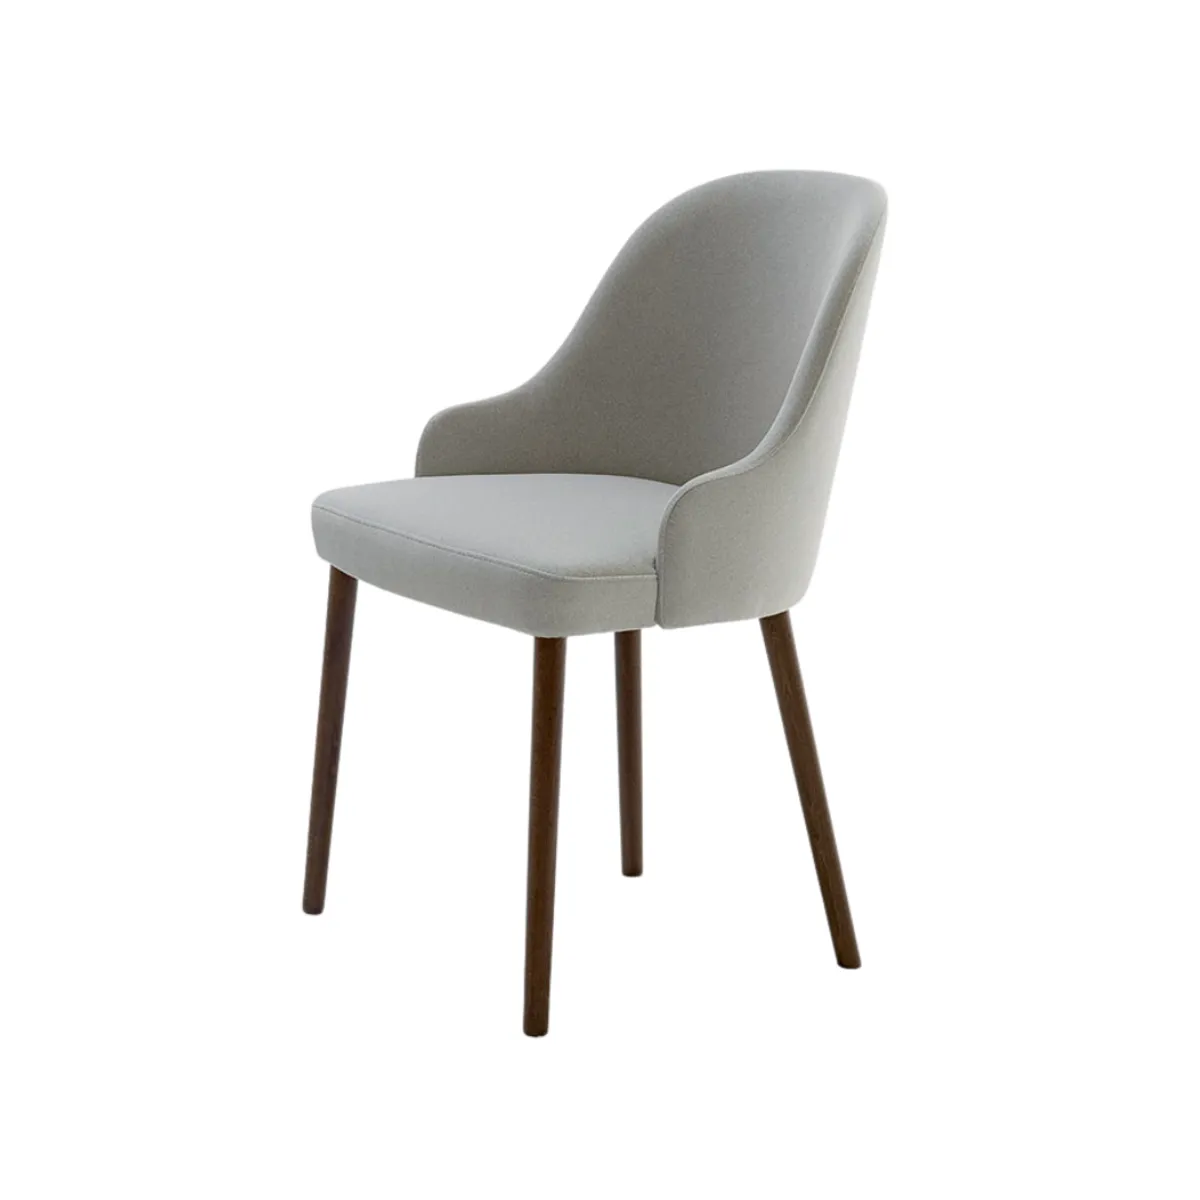 Clarendon side chair 1